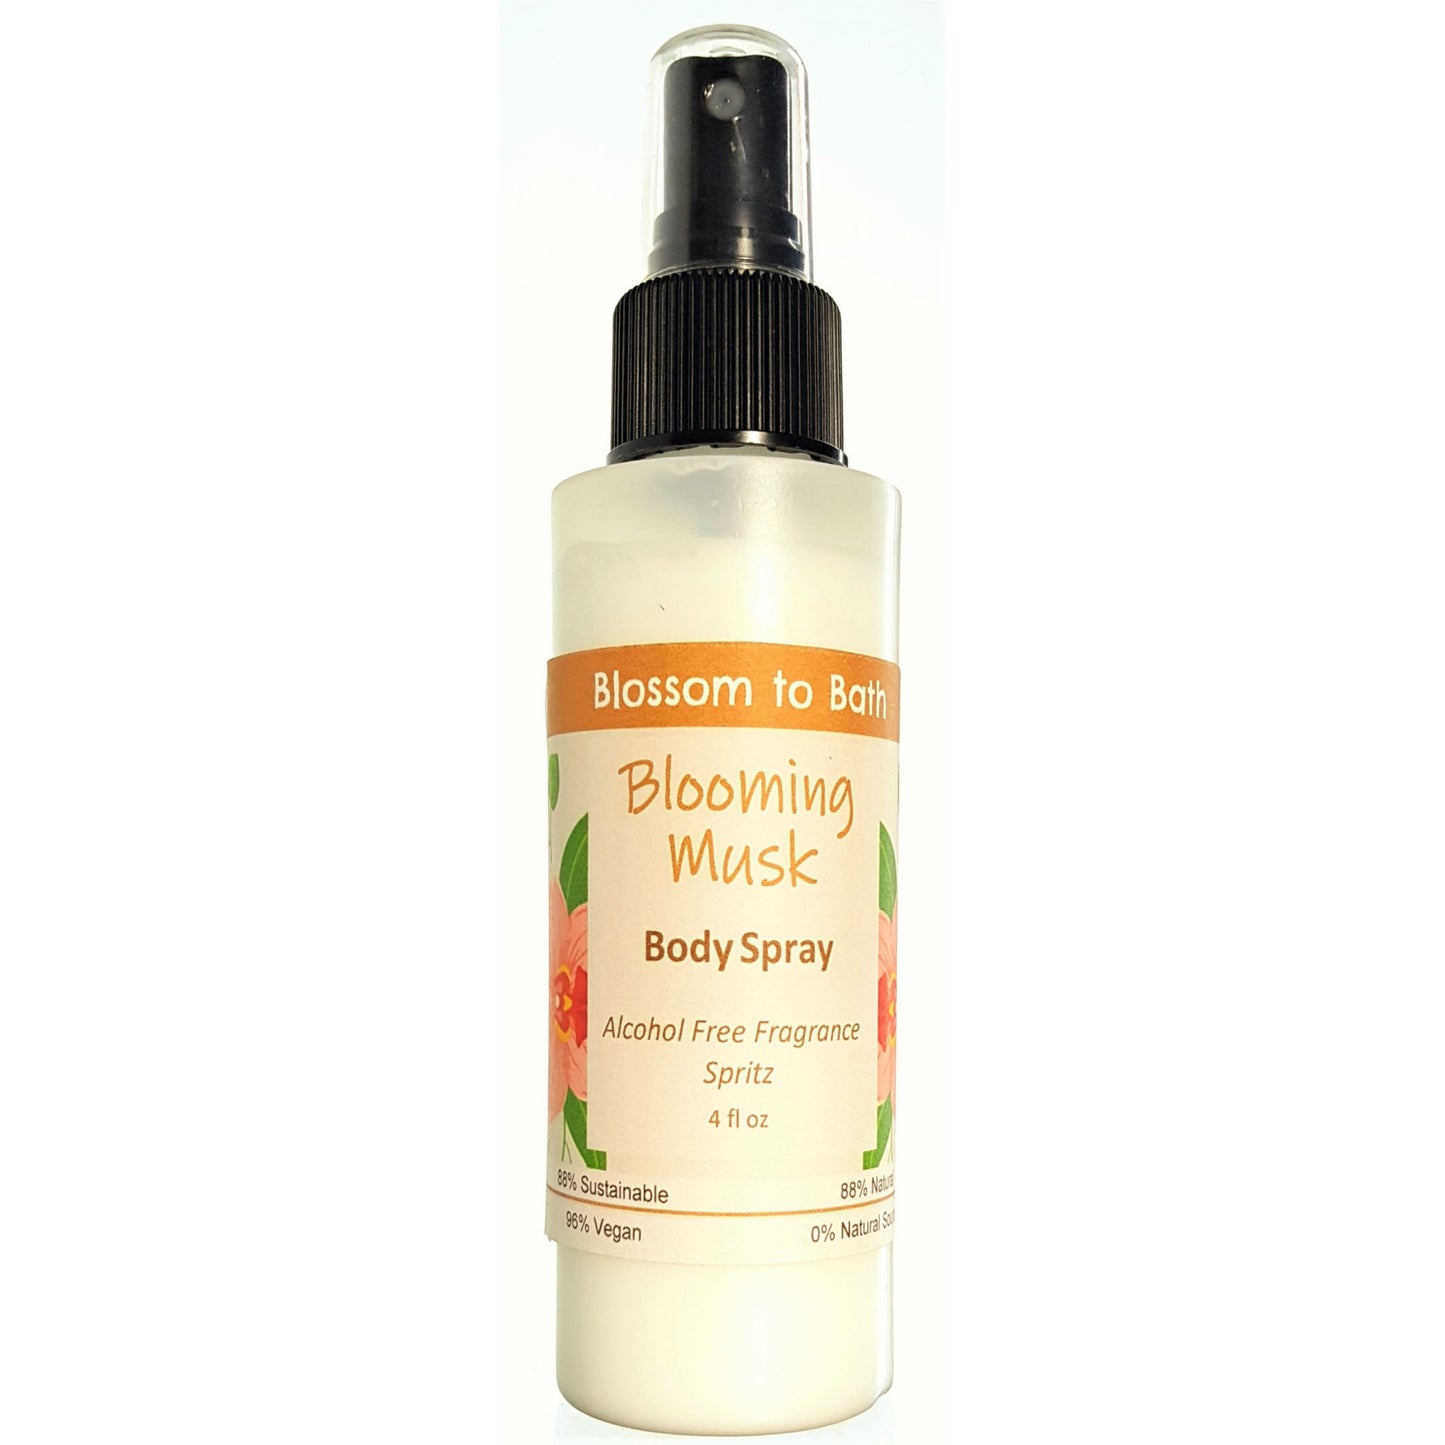 Buy Blossom to Bath Blooming Musk Body Spray from Flowersong Soap Studio.  Natural  freshening of skin, linens, or air  A sensual floral and musk scent that is subtle and feminine.